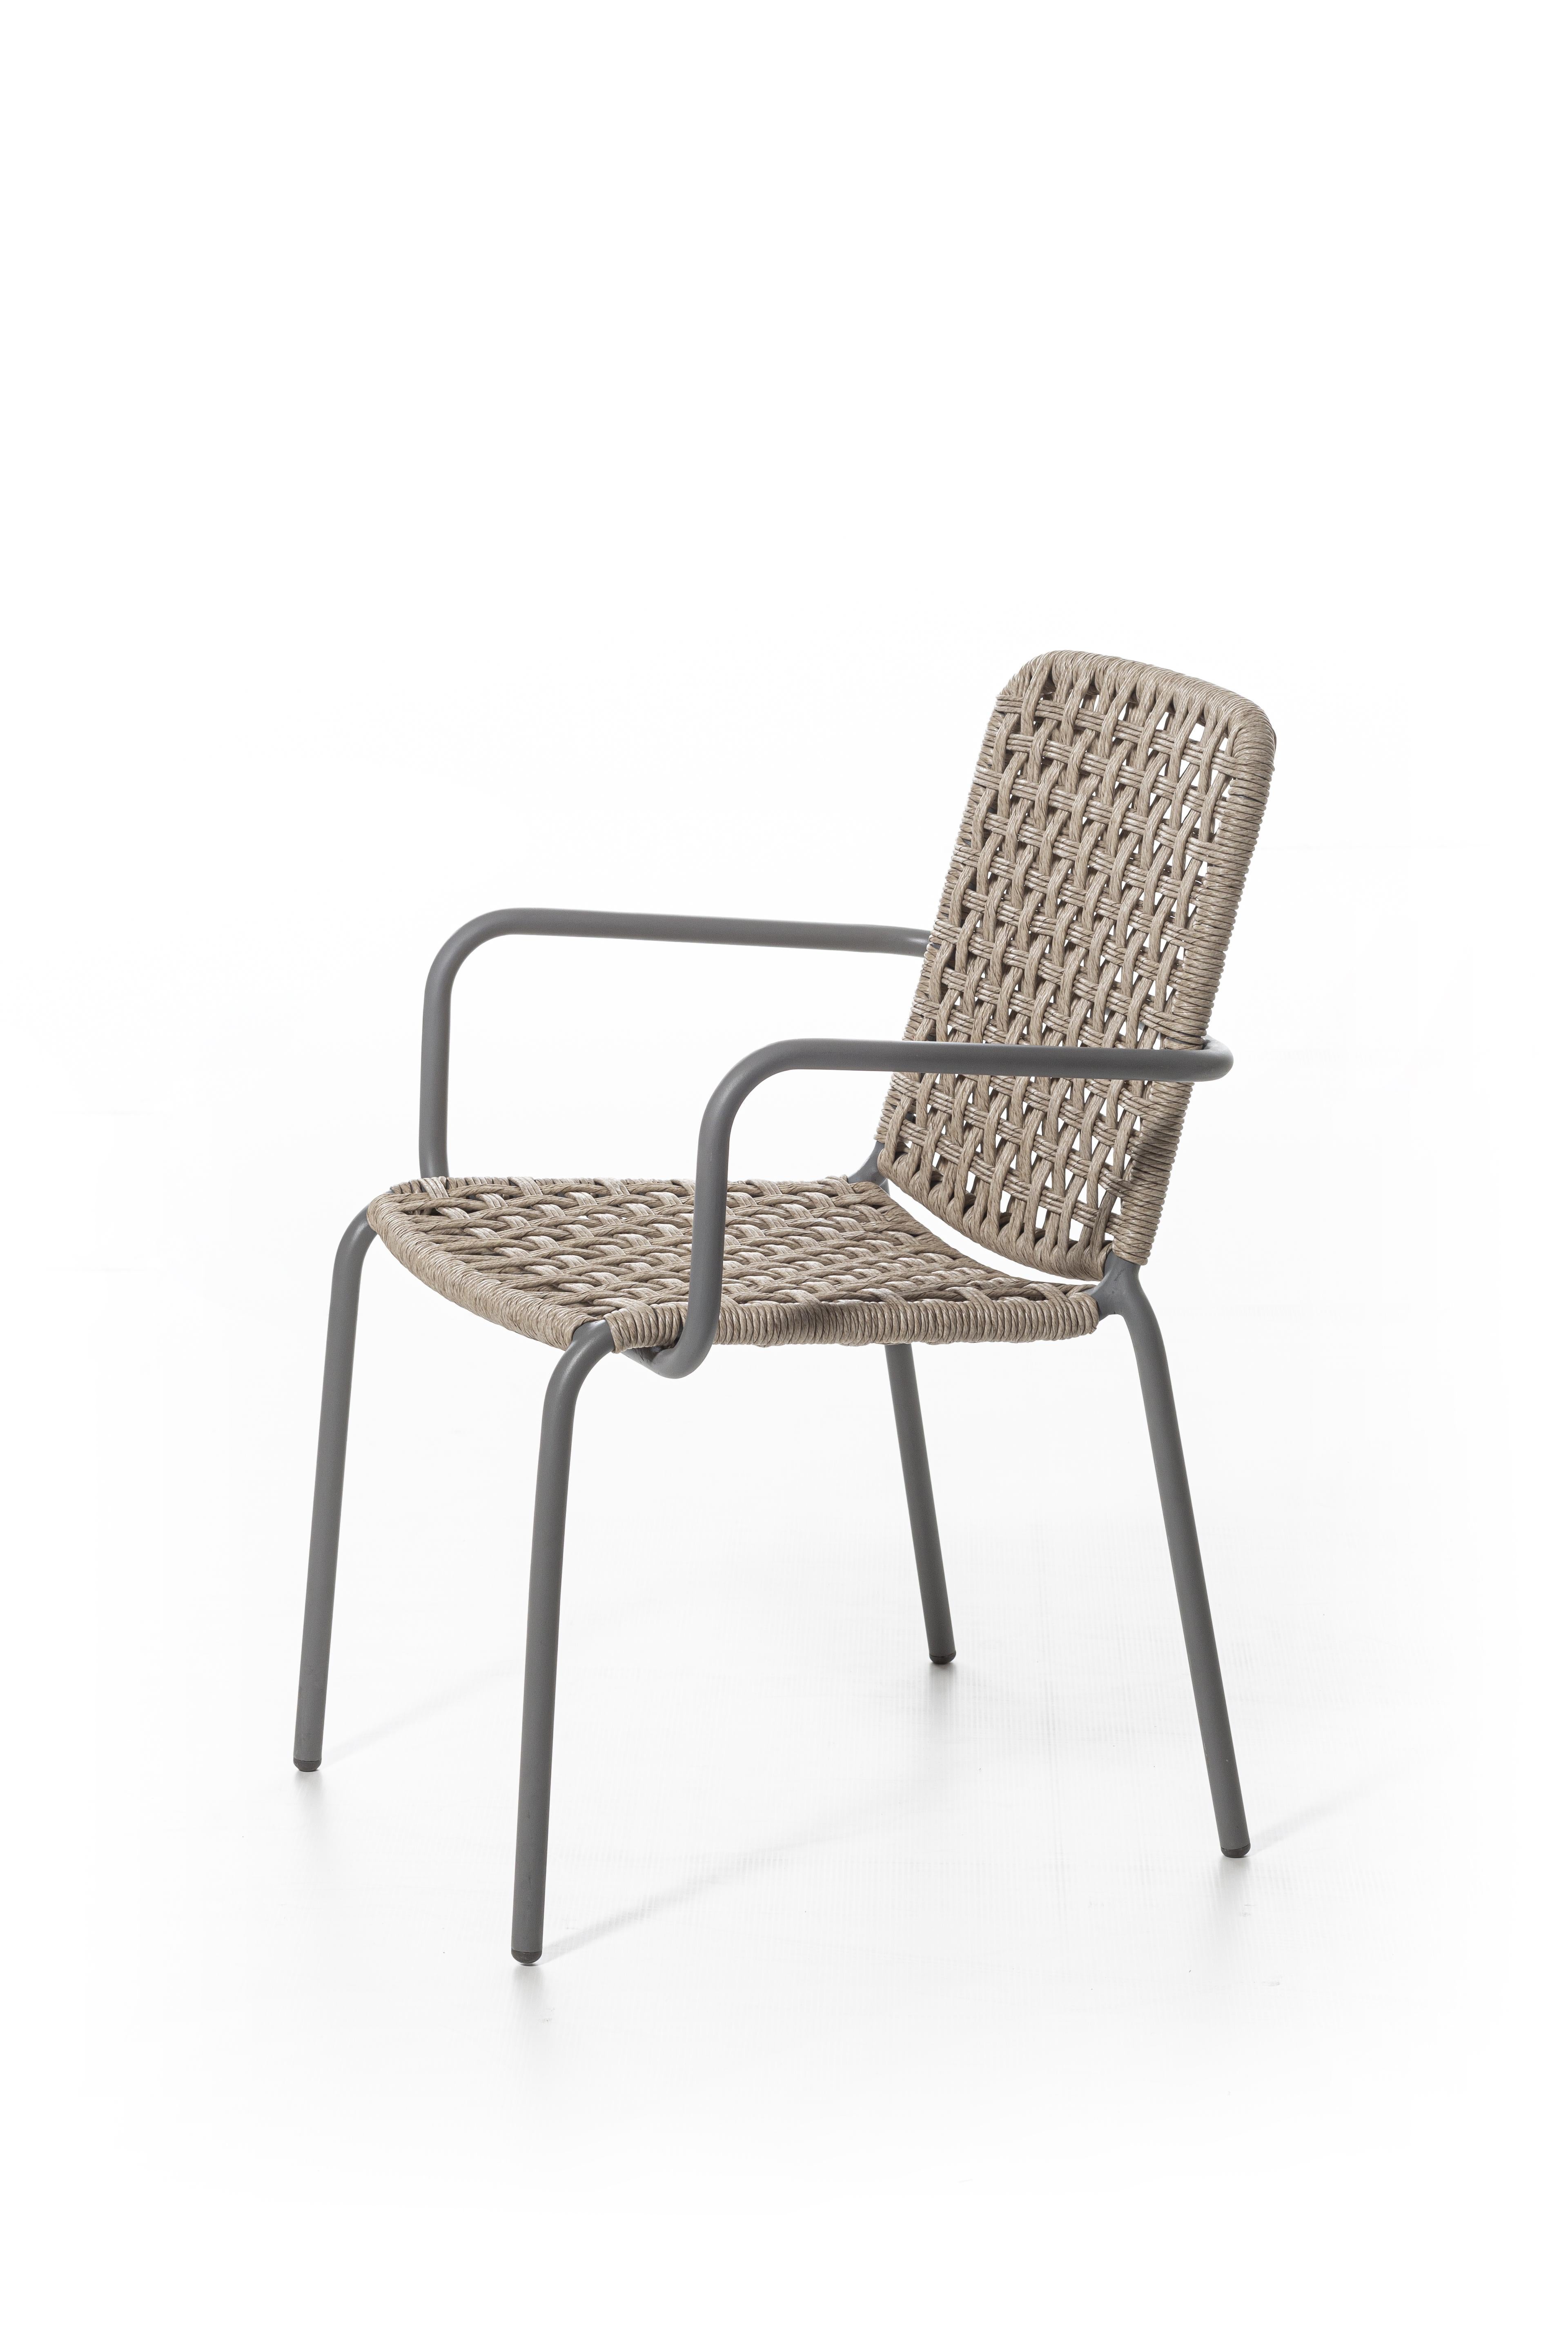 Simple and refined, the Straw 23/24 chair family, with and without armrests, is characterised by the structure in tubular aluminium painted light grey. A slender and light product covered with a handwoven weave with a double torsion polyethylene